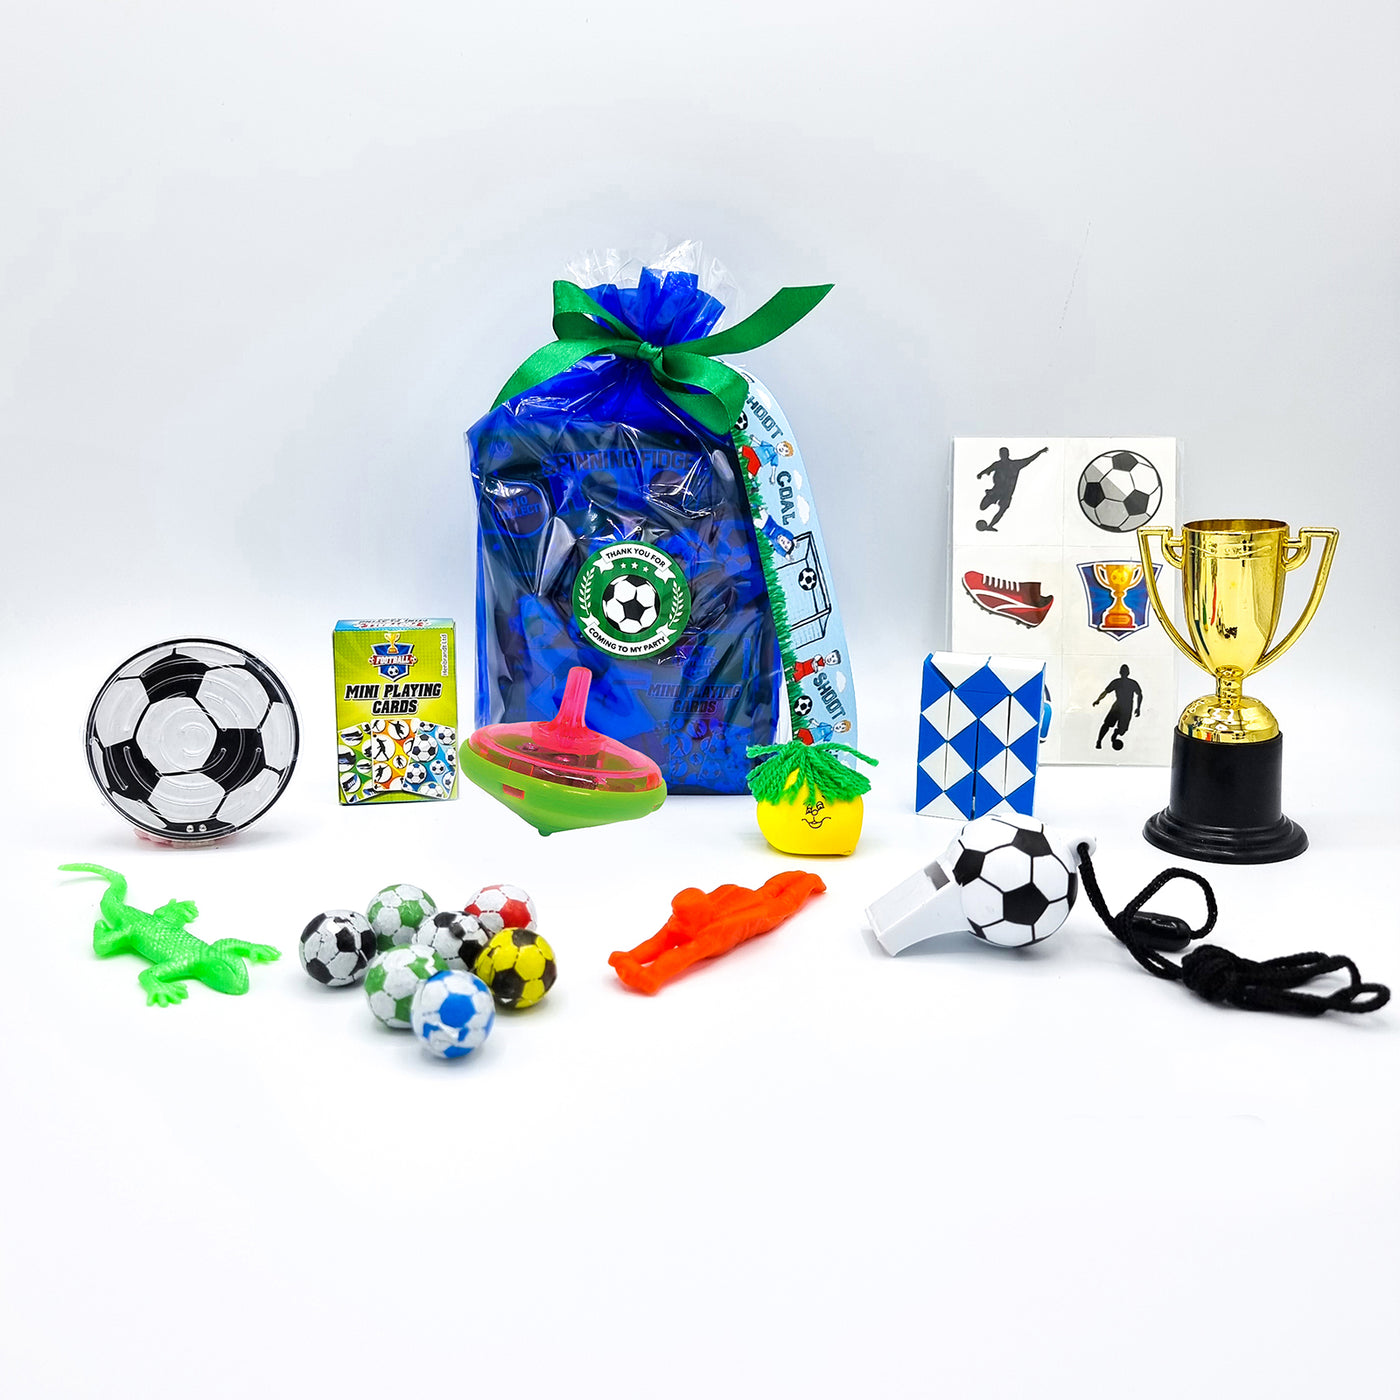 Pre-filled Blue Football Party Bags For Children. Party Favours With Sweets And Toys.